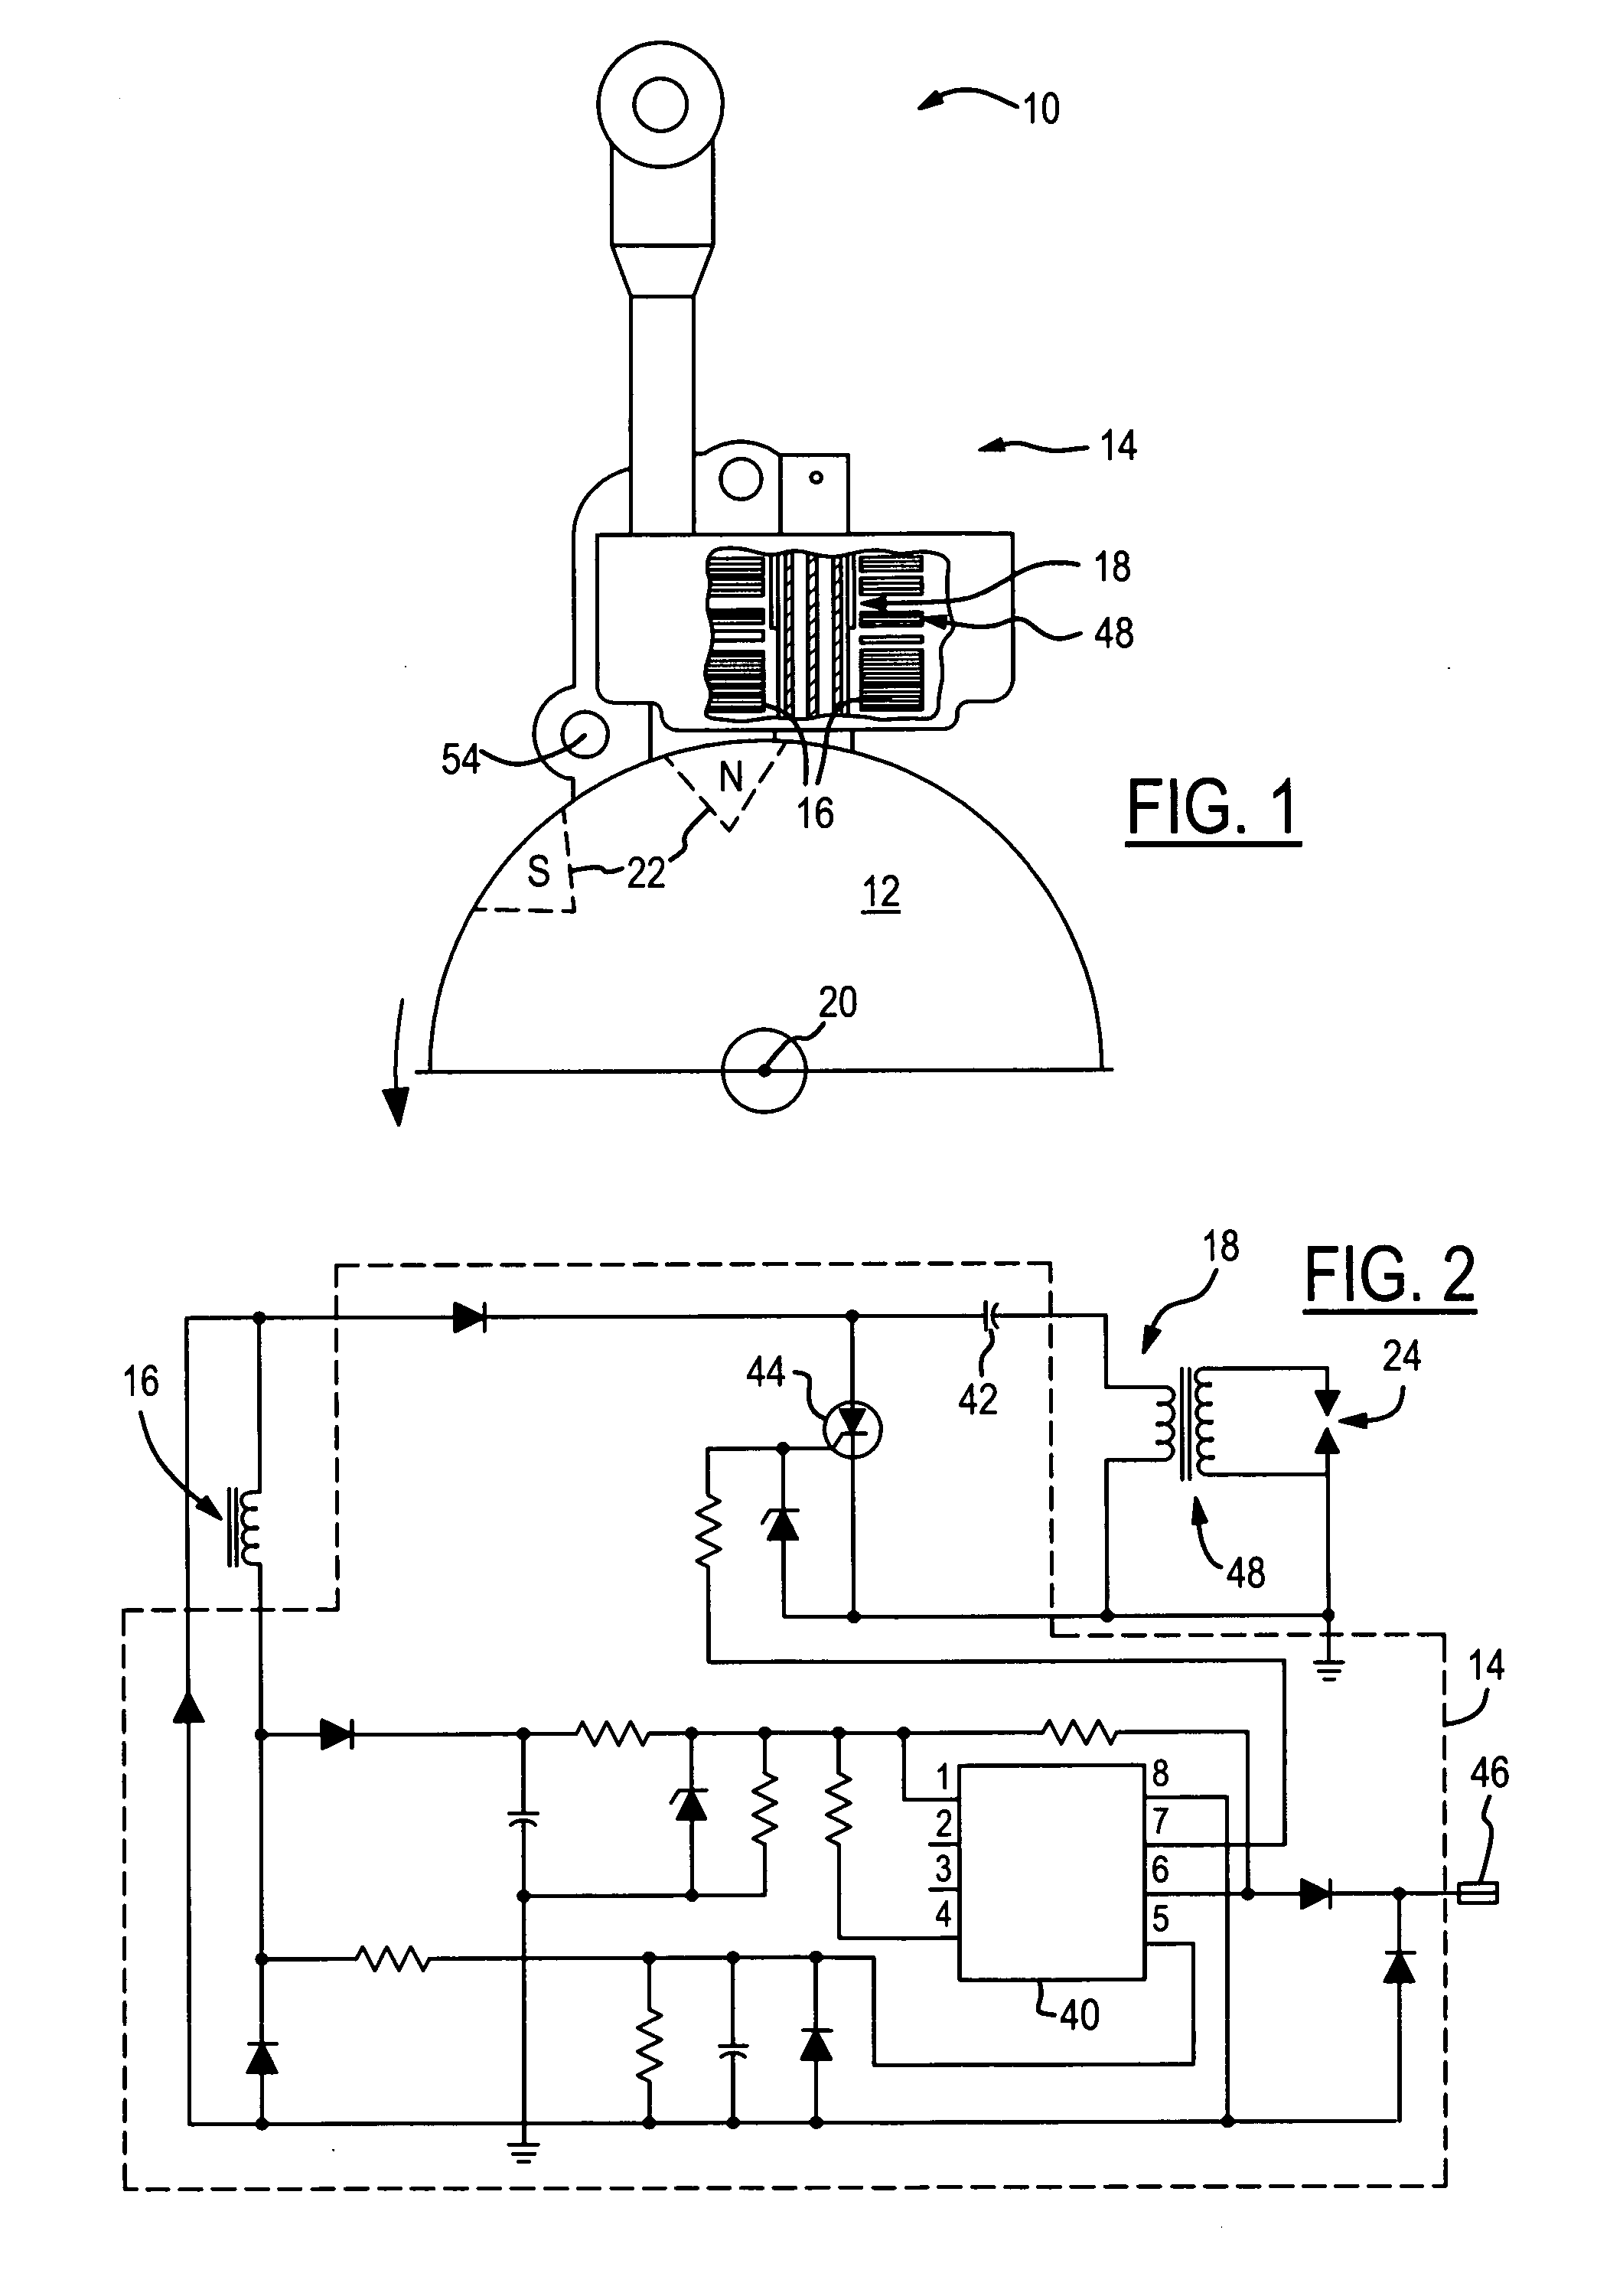 Apparatus and method for limiting excessive engine speeds in a light-duty combustion engine